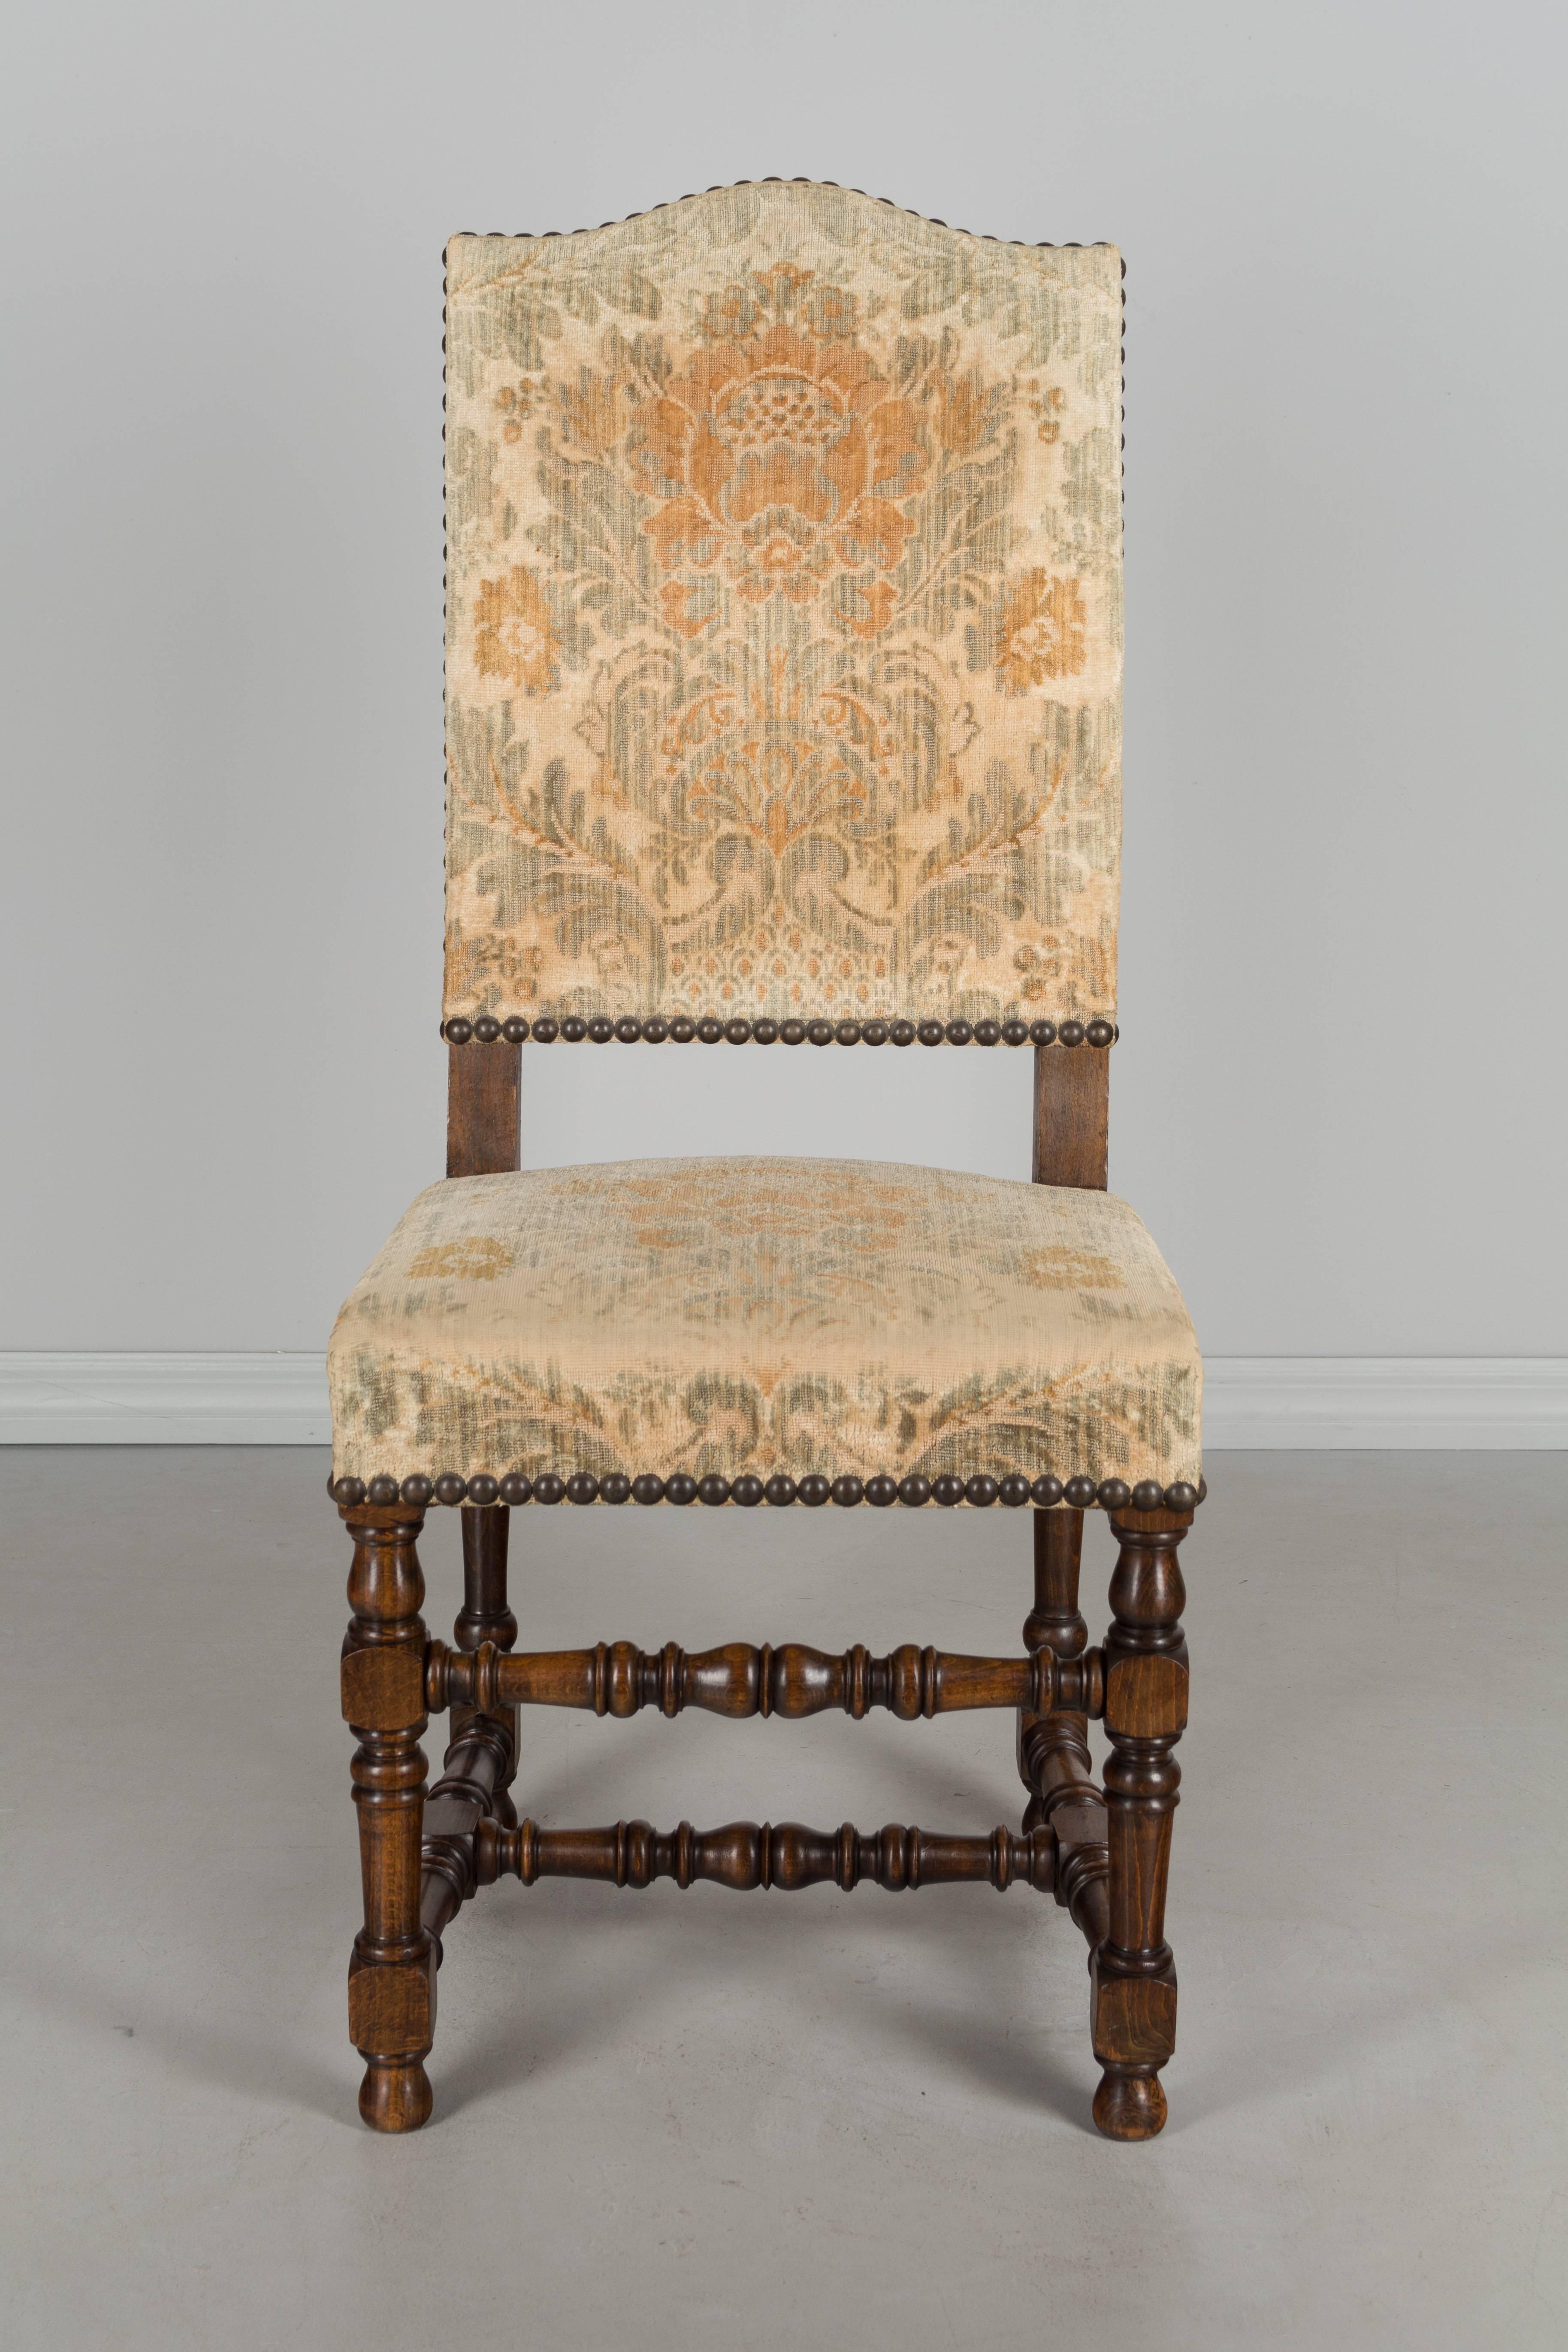 Set of 10 French Louis XIII style dining chairs made of beechwood with turned stretchers. Very sturdy and comfortable. Old upholstery is serviceable but varies in condition with some chairs showing greater wear than others.
More photos available